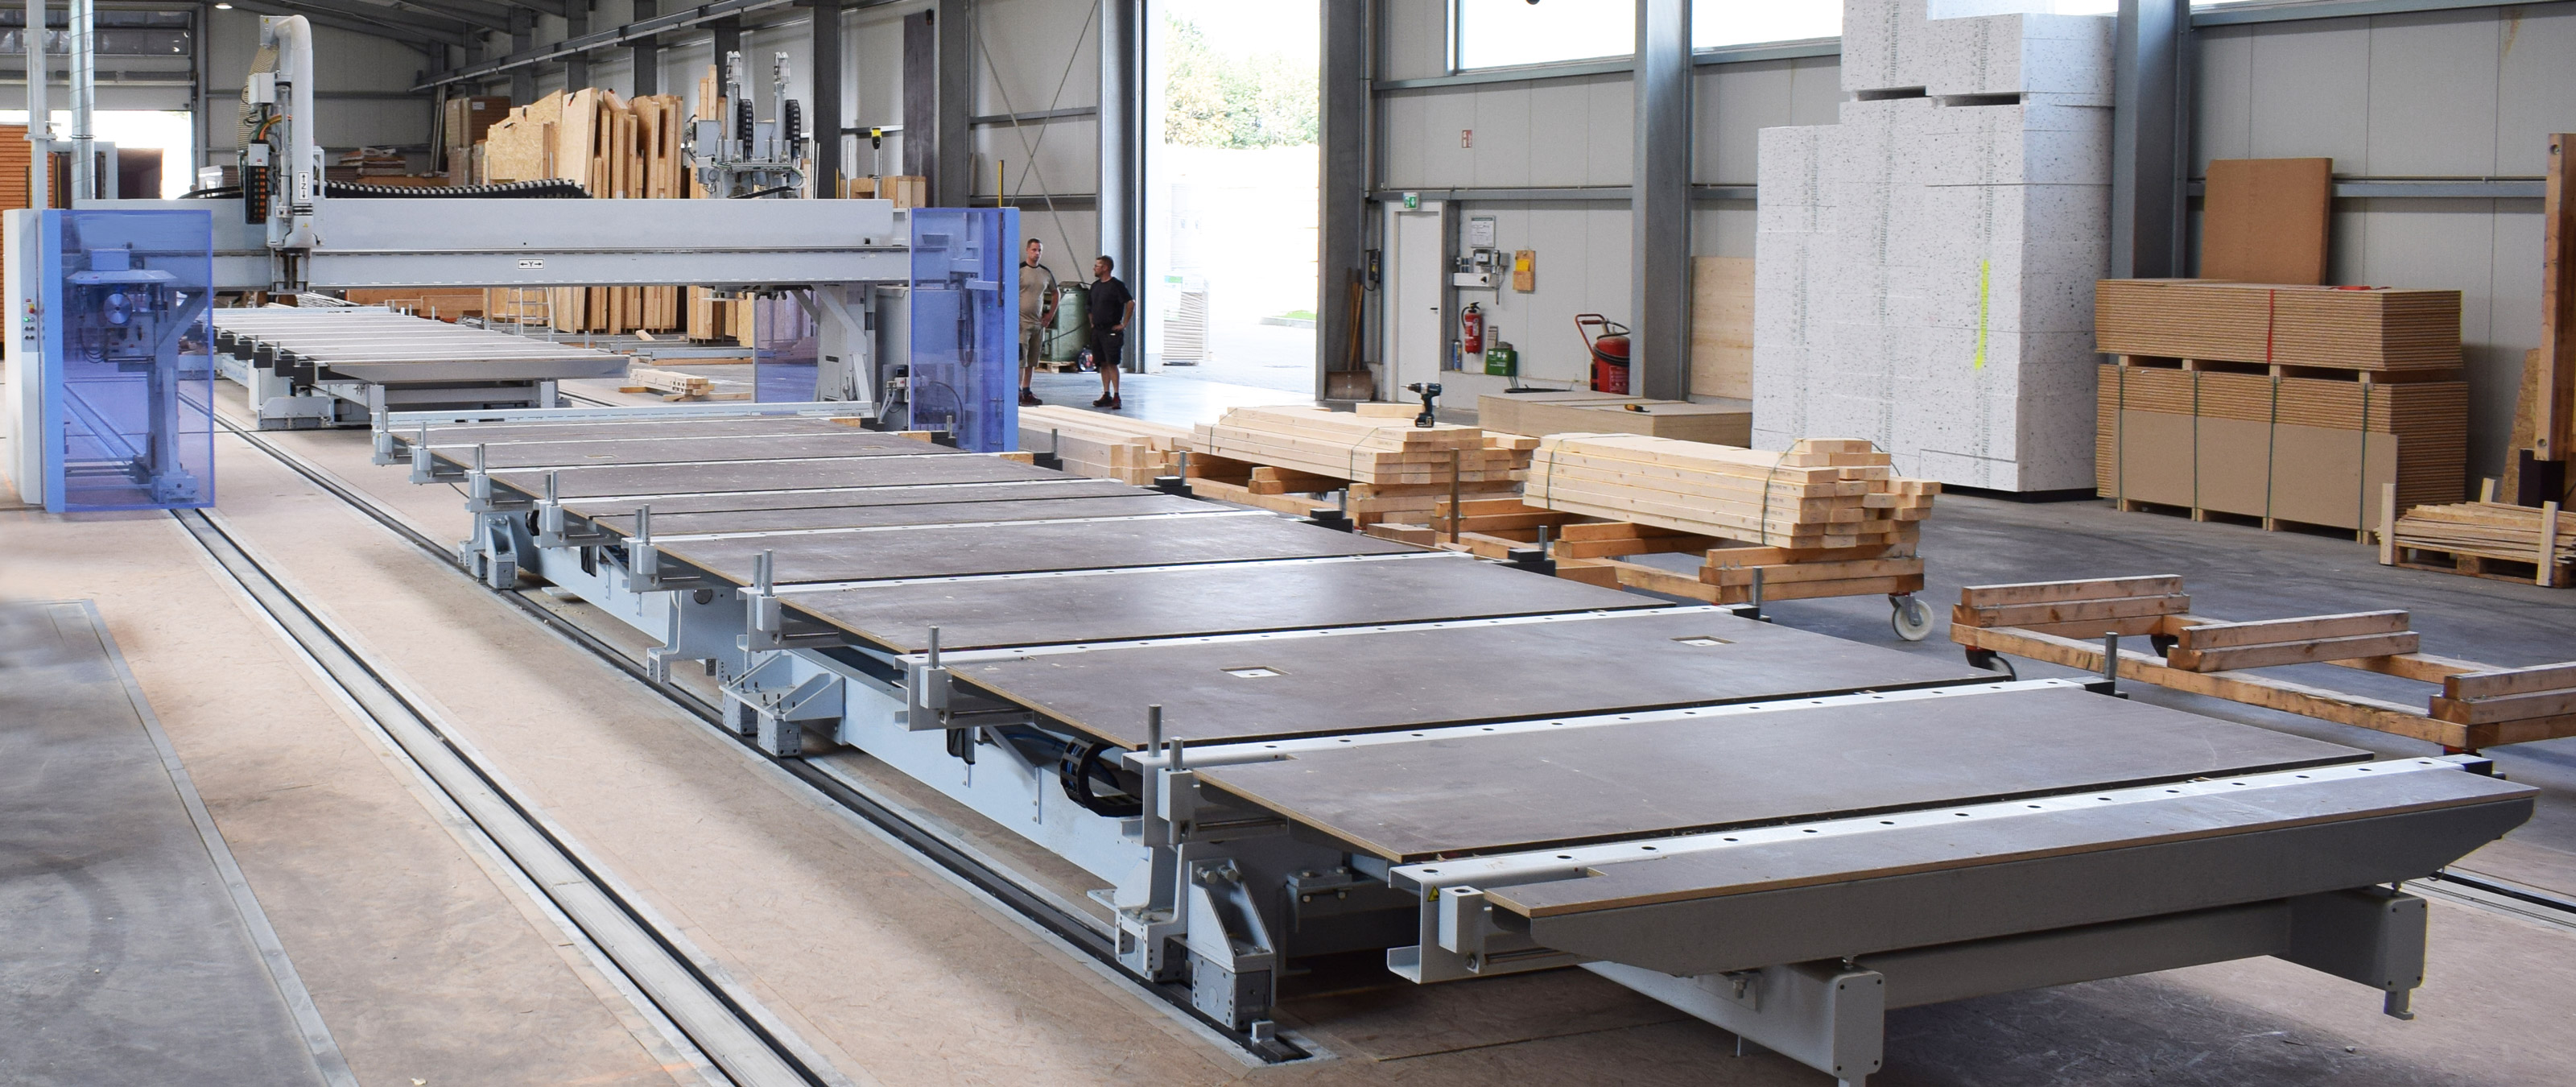 Across an area of 34 m x 9 m, the compact system is used to manufacture closed and open elements.